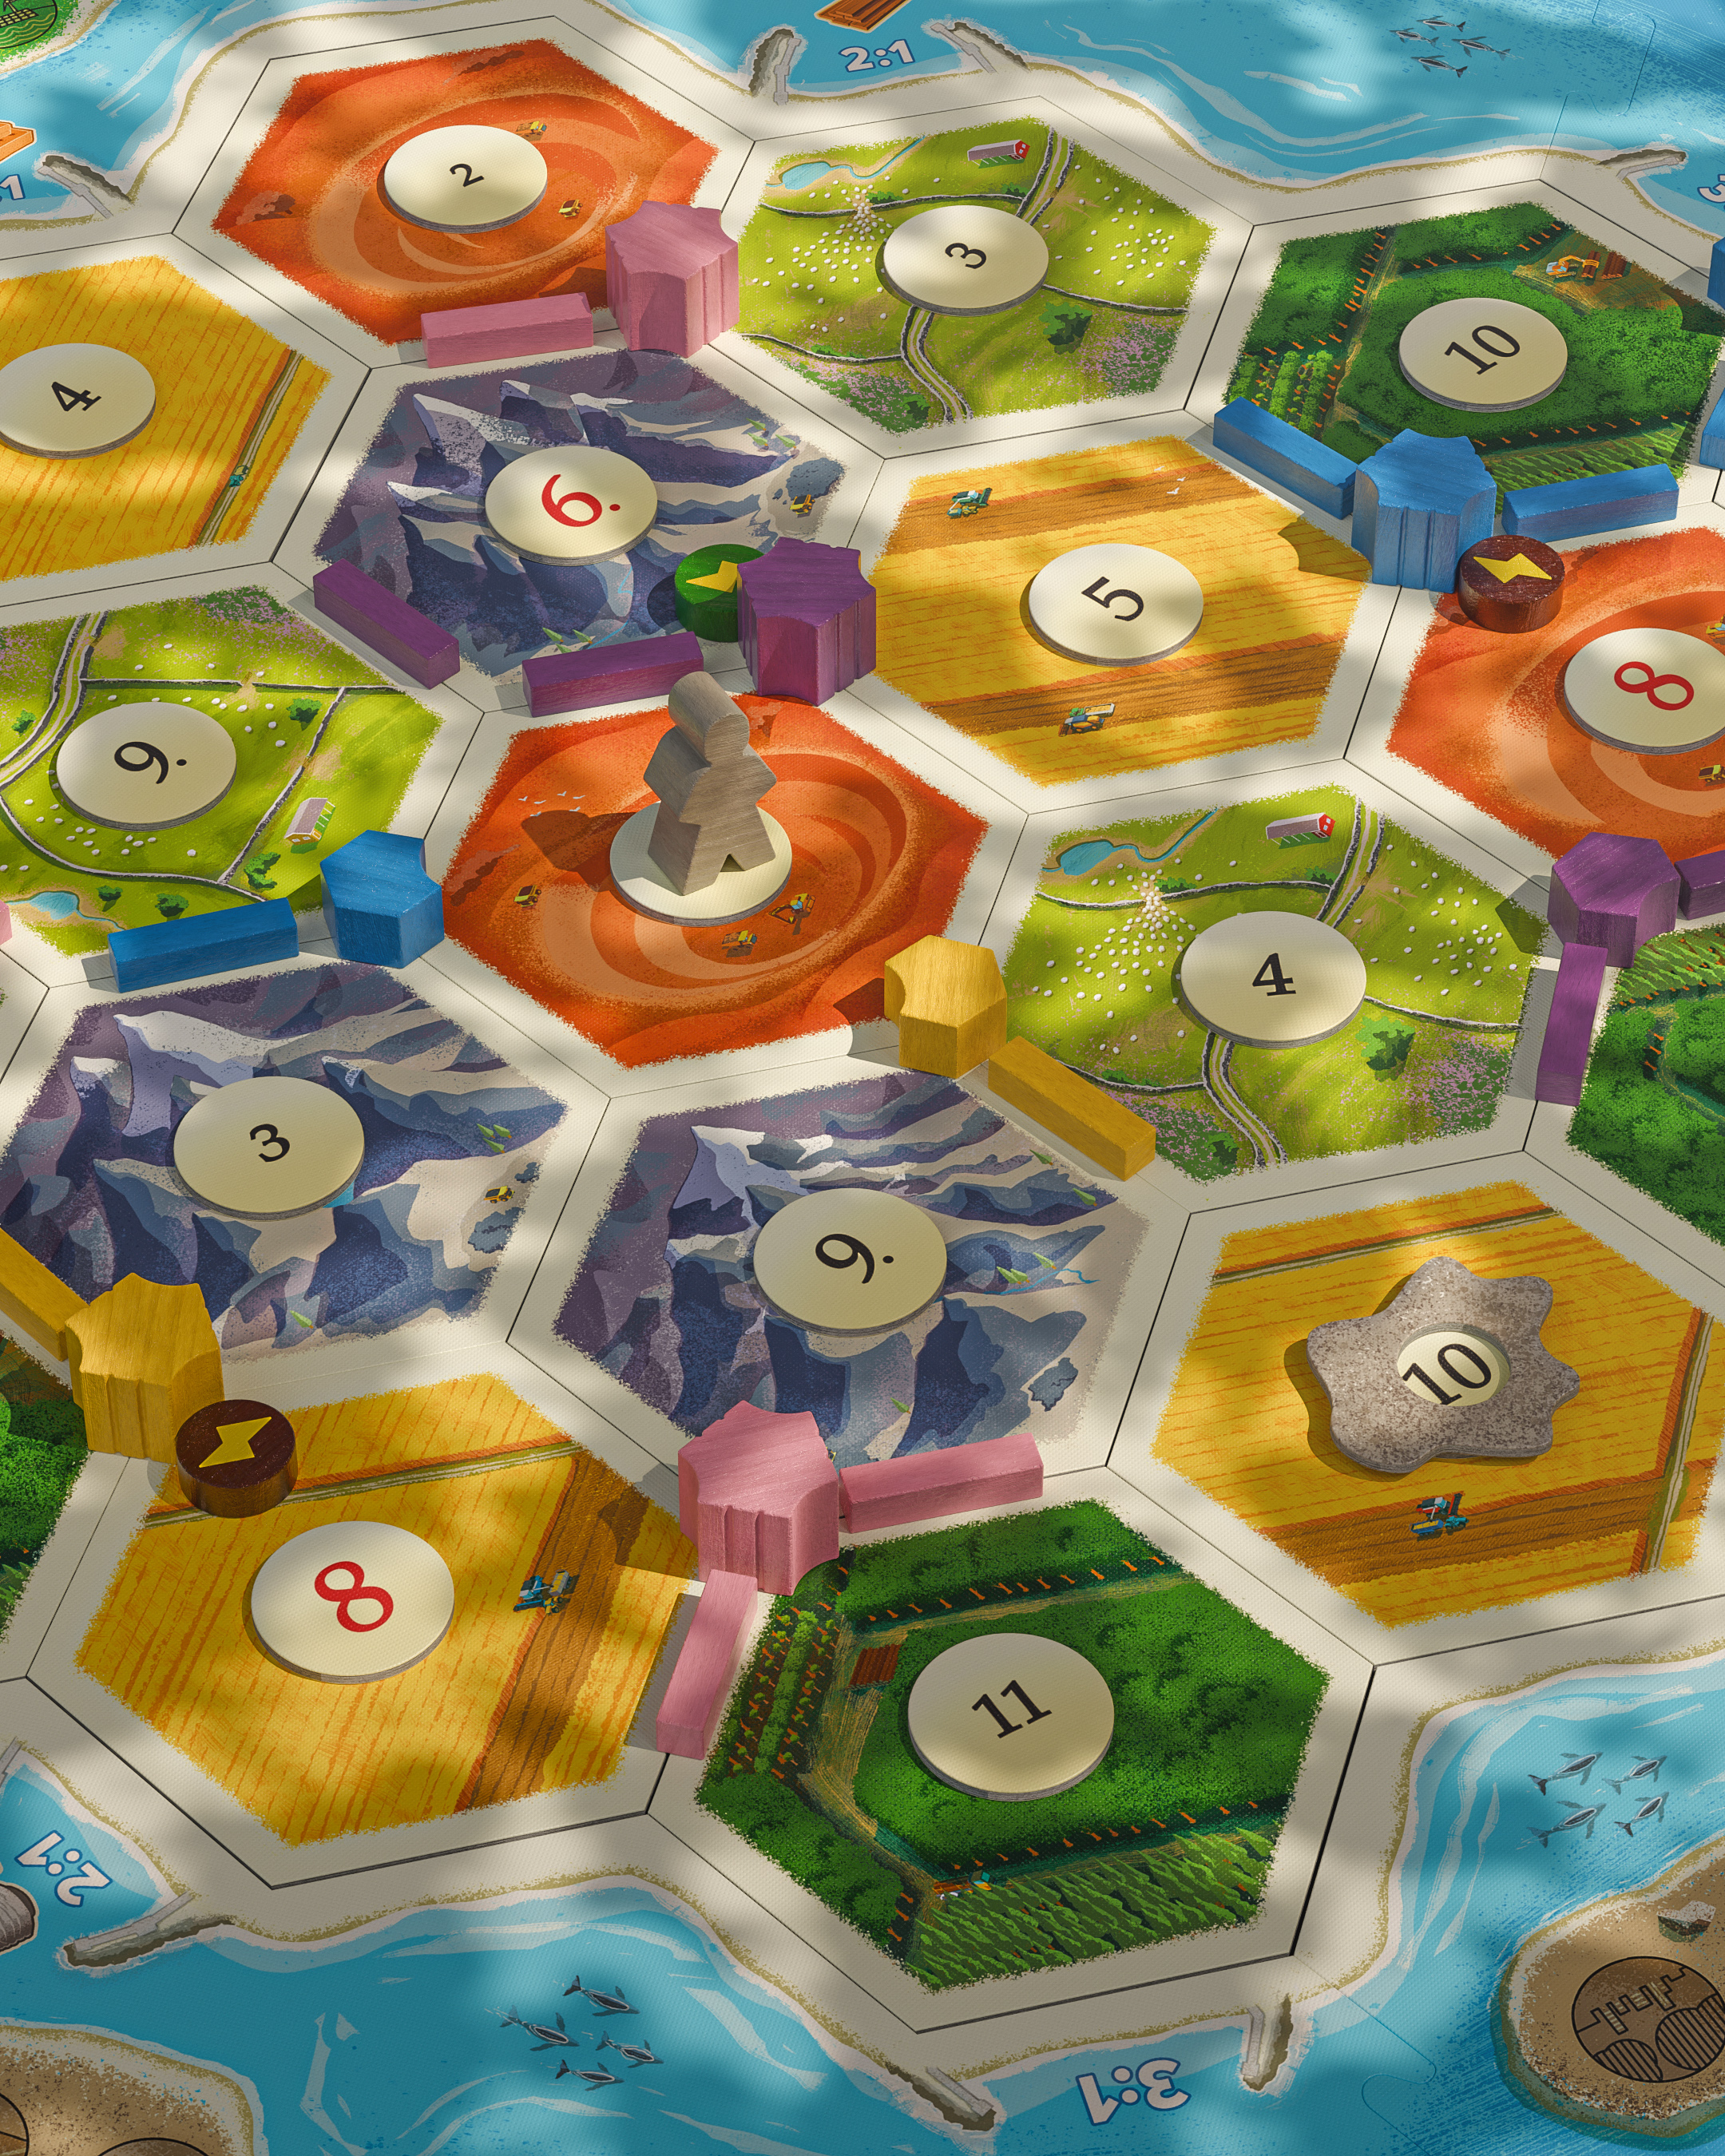 An image showing the board of CATAN new energies with various colored, hexagonal tiles, while featuring new yellow, blue, pink and purple game pieces unique to this game. Photo by Andreas Resch.